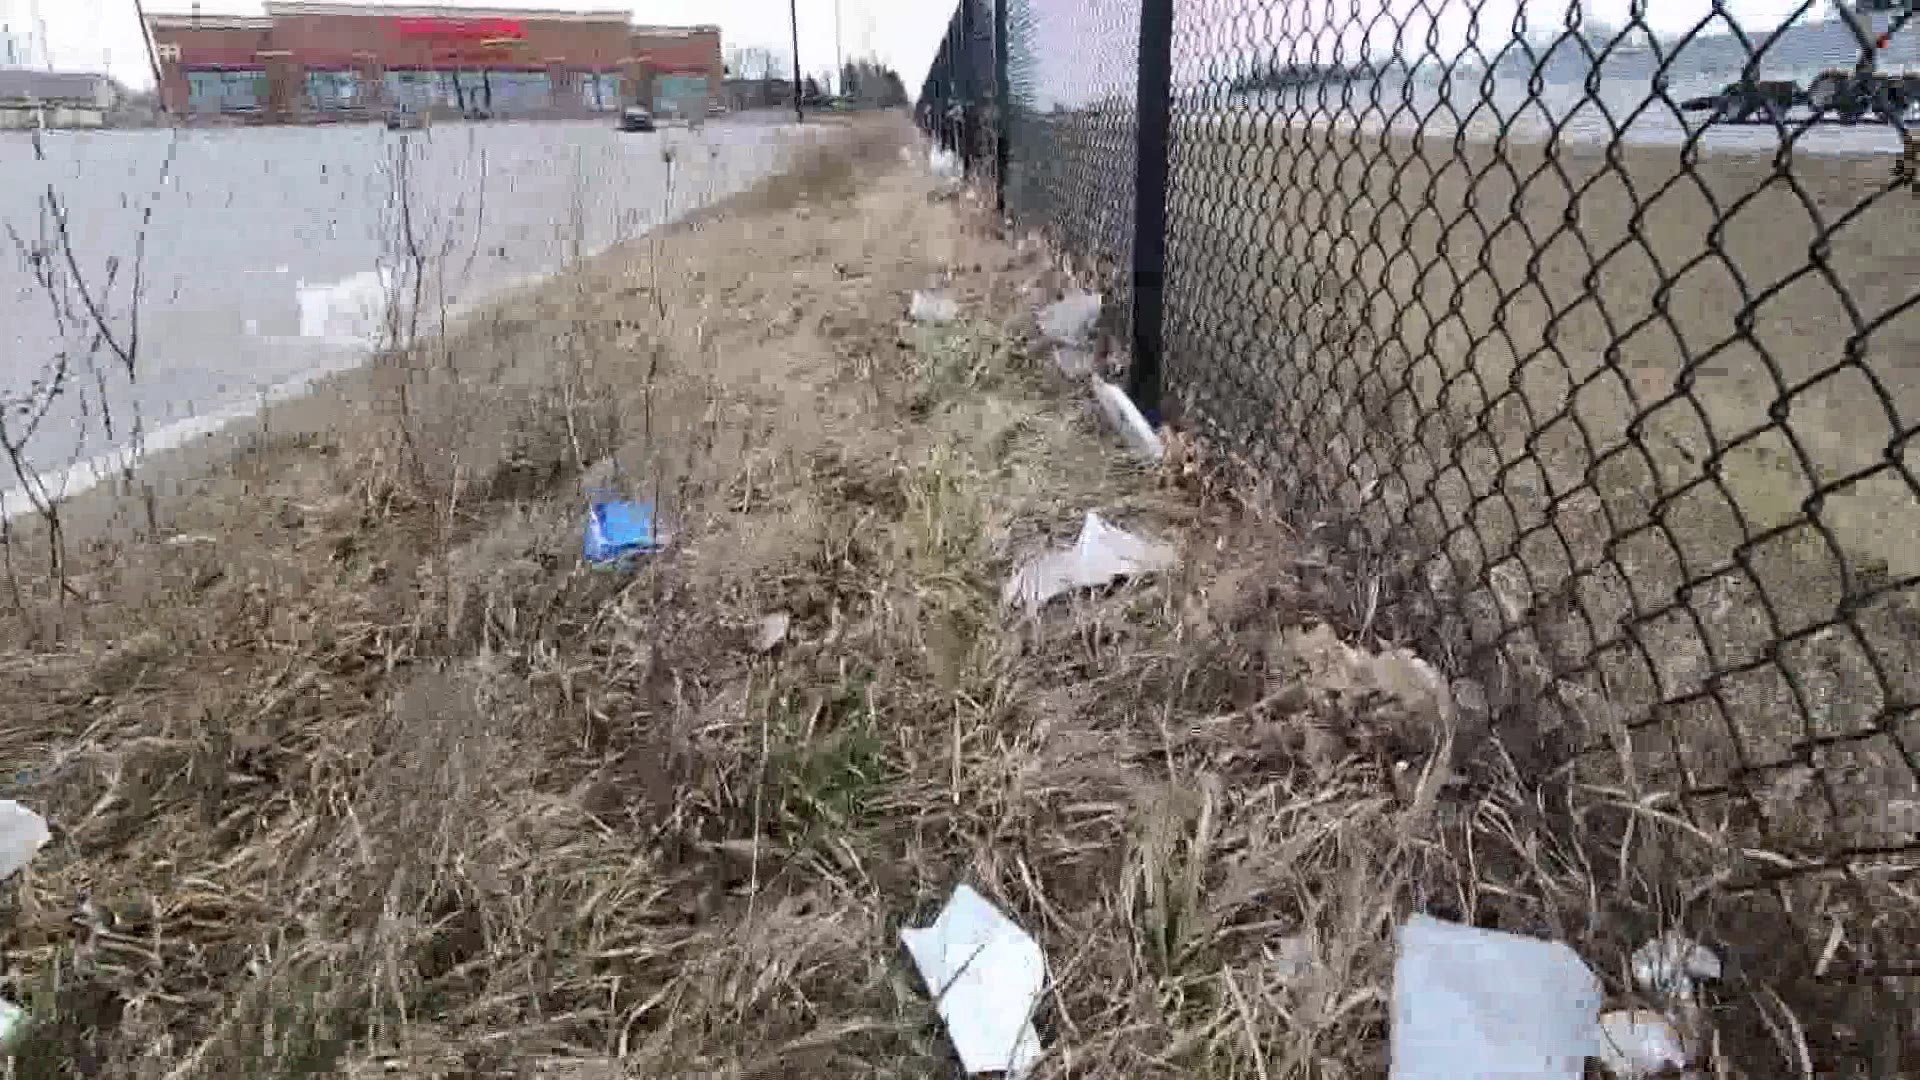 ODOT press secretary Matt Bruning said cleaning up litter is an entirely preventable task.